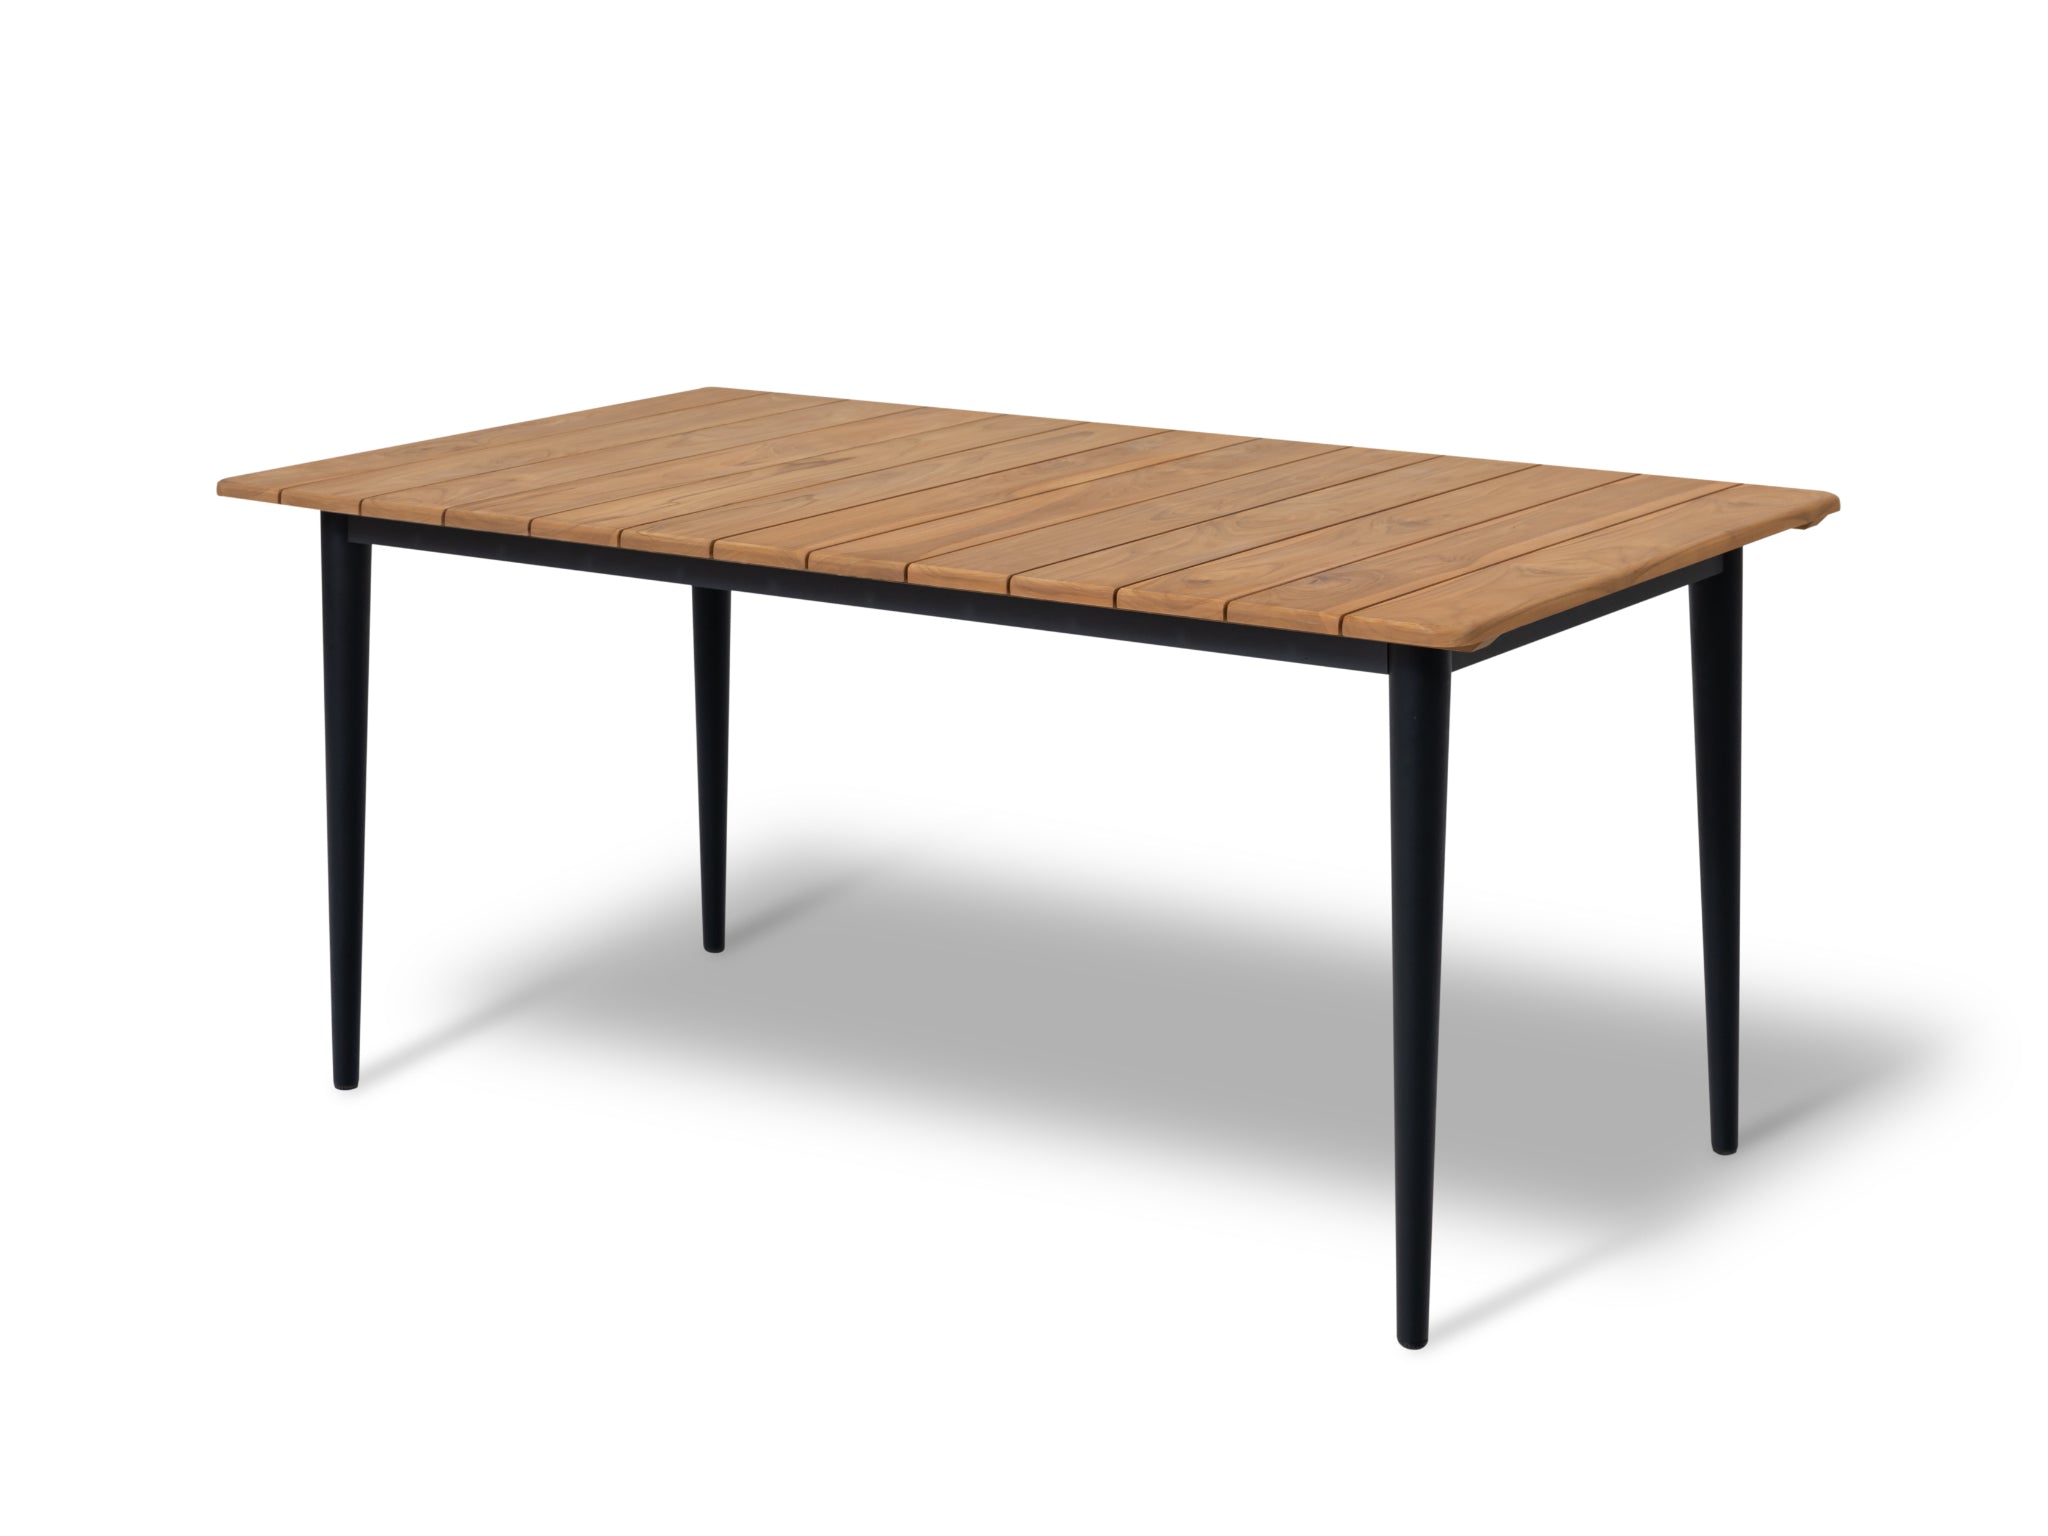 SIMPO by Sunlongarden Axis Dining Table